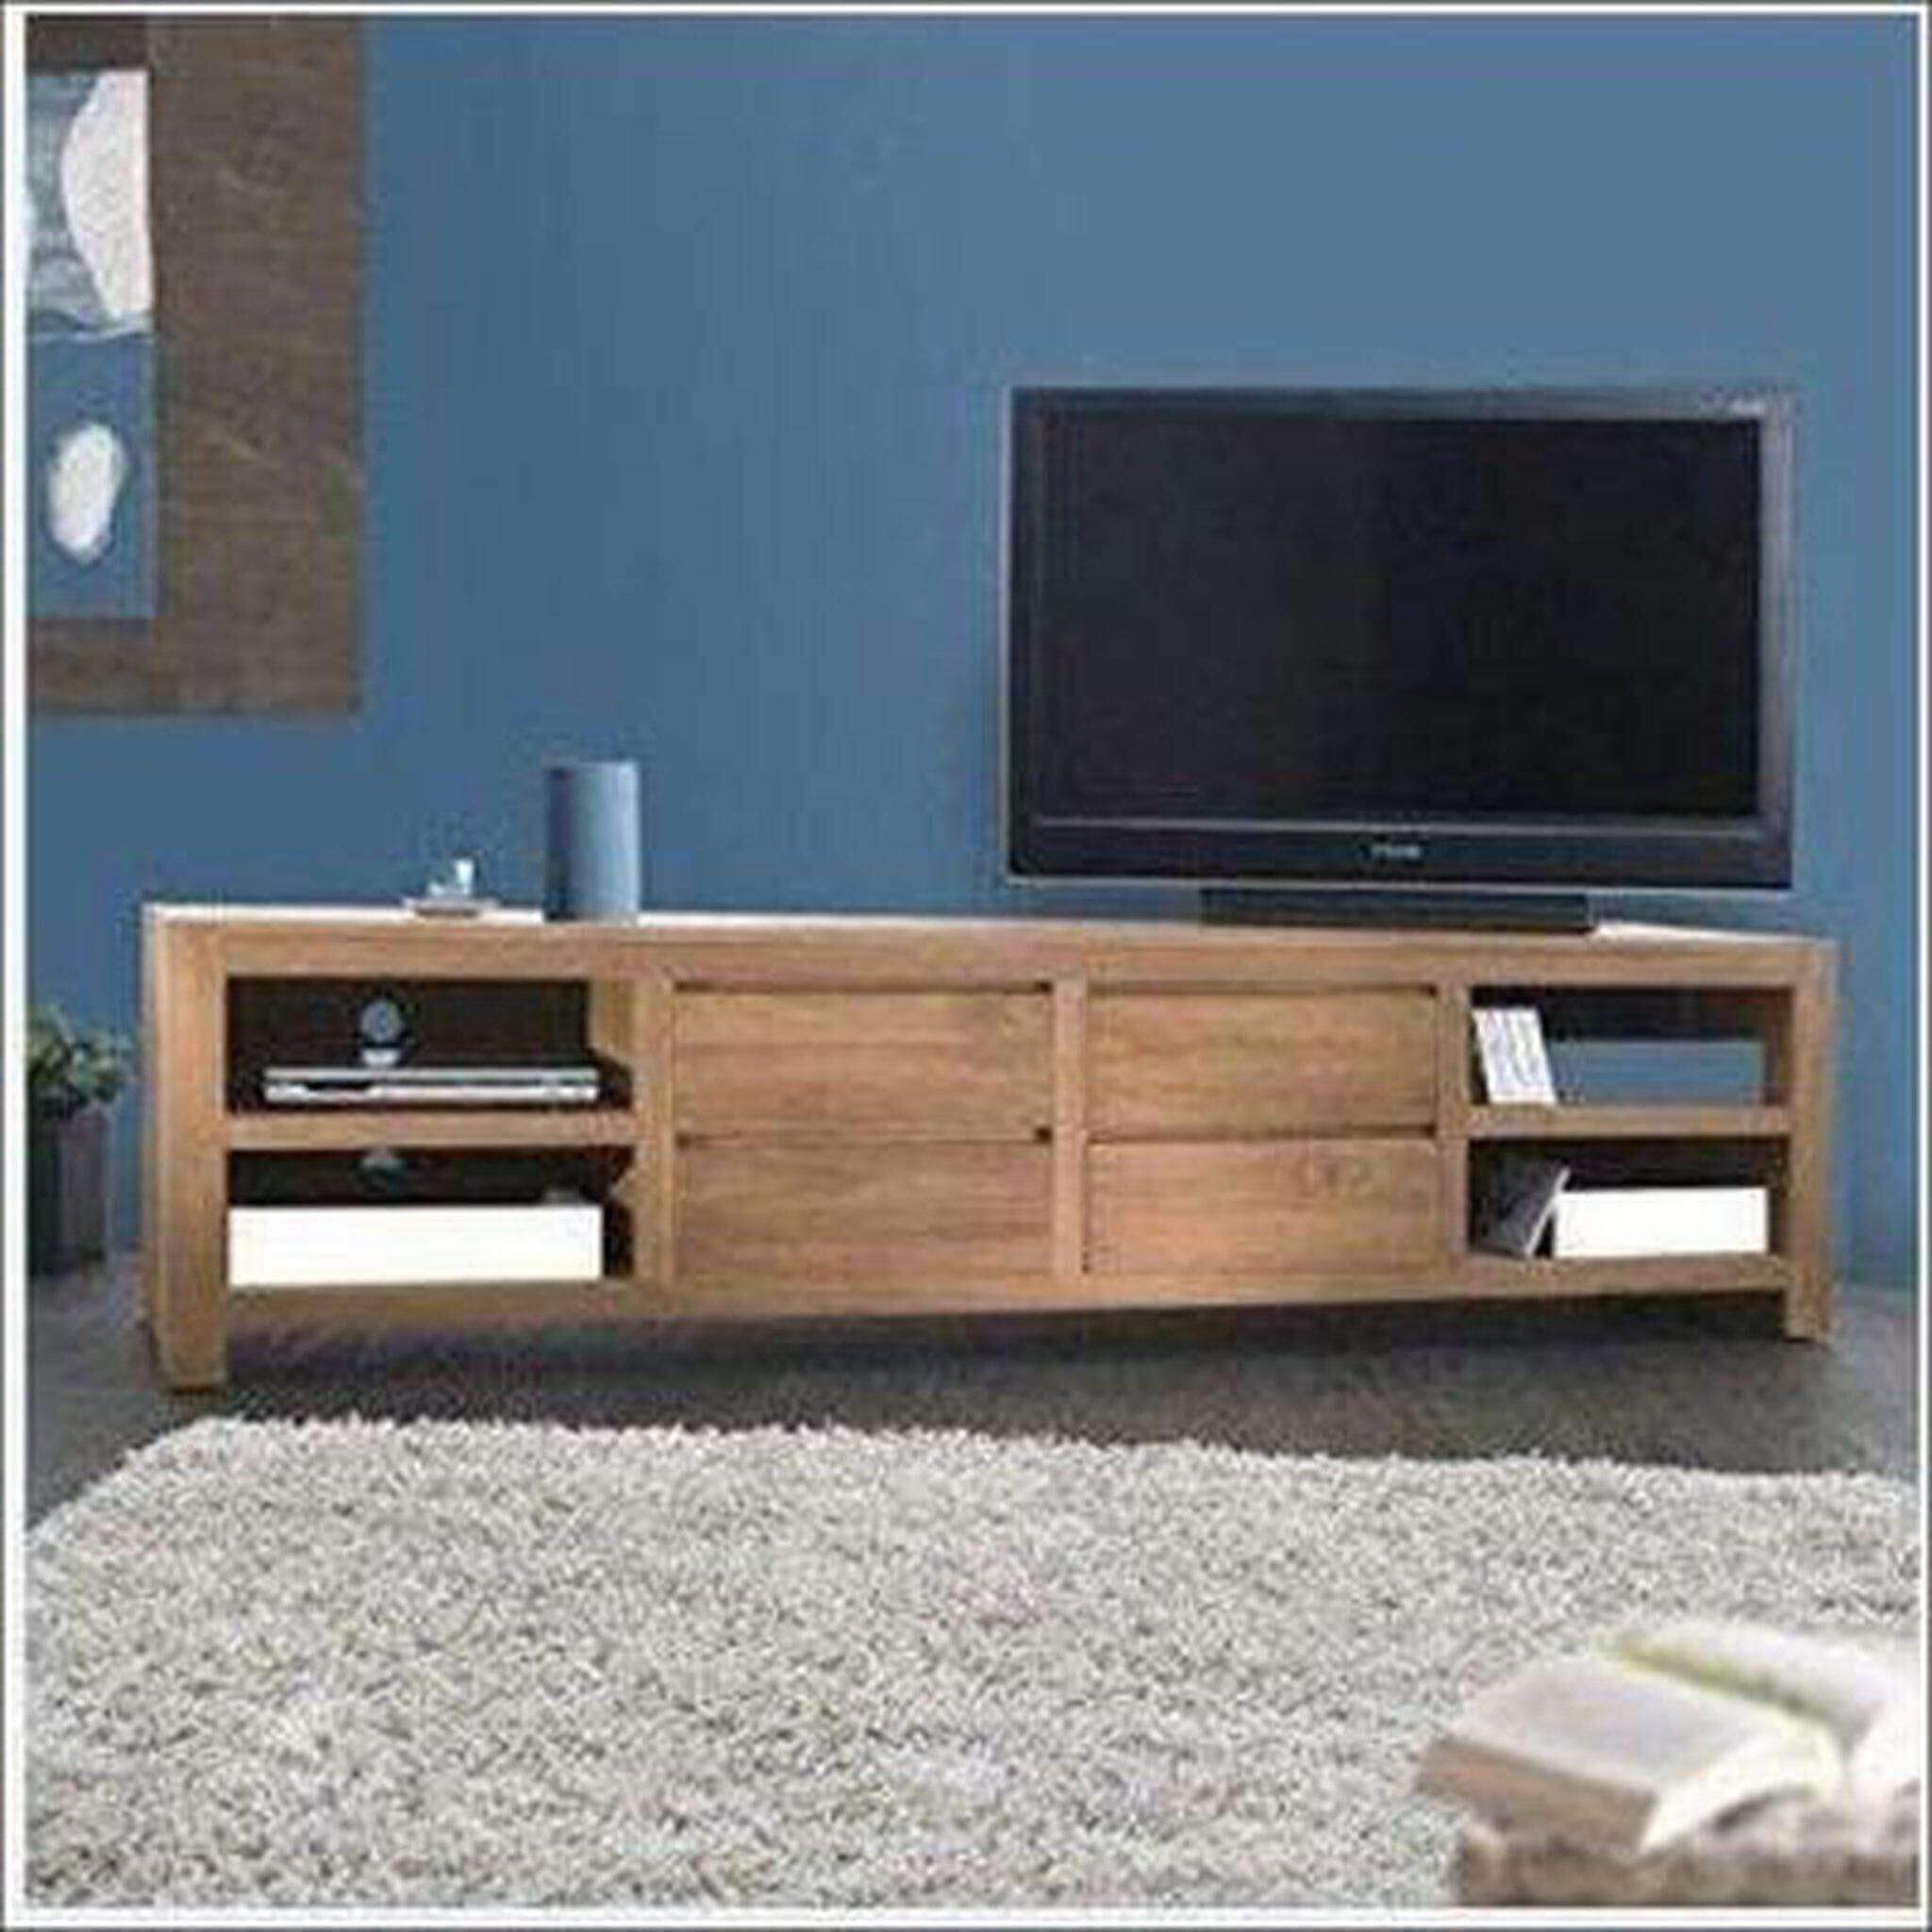 Teak TV Cabinet With 4 Drawers and 4 shelves - TimberCraft